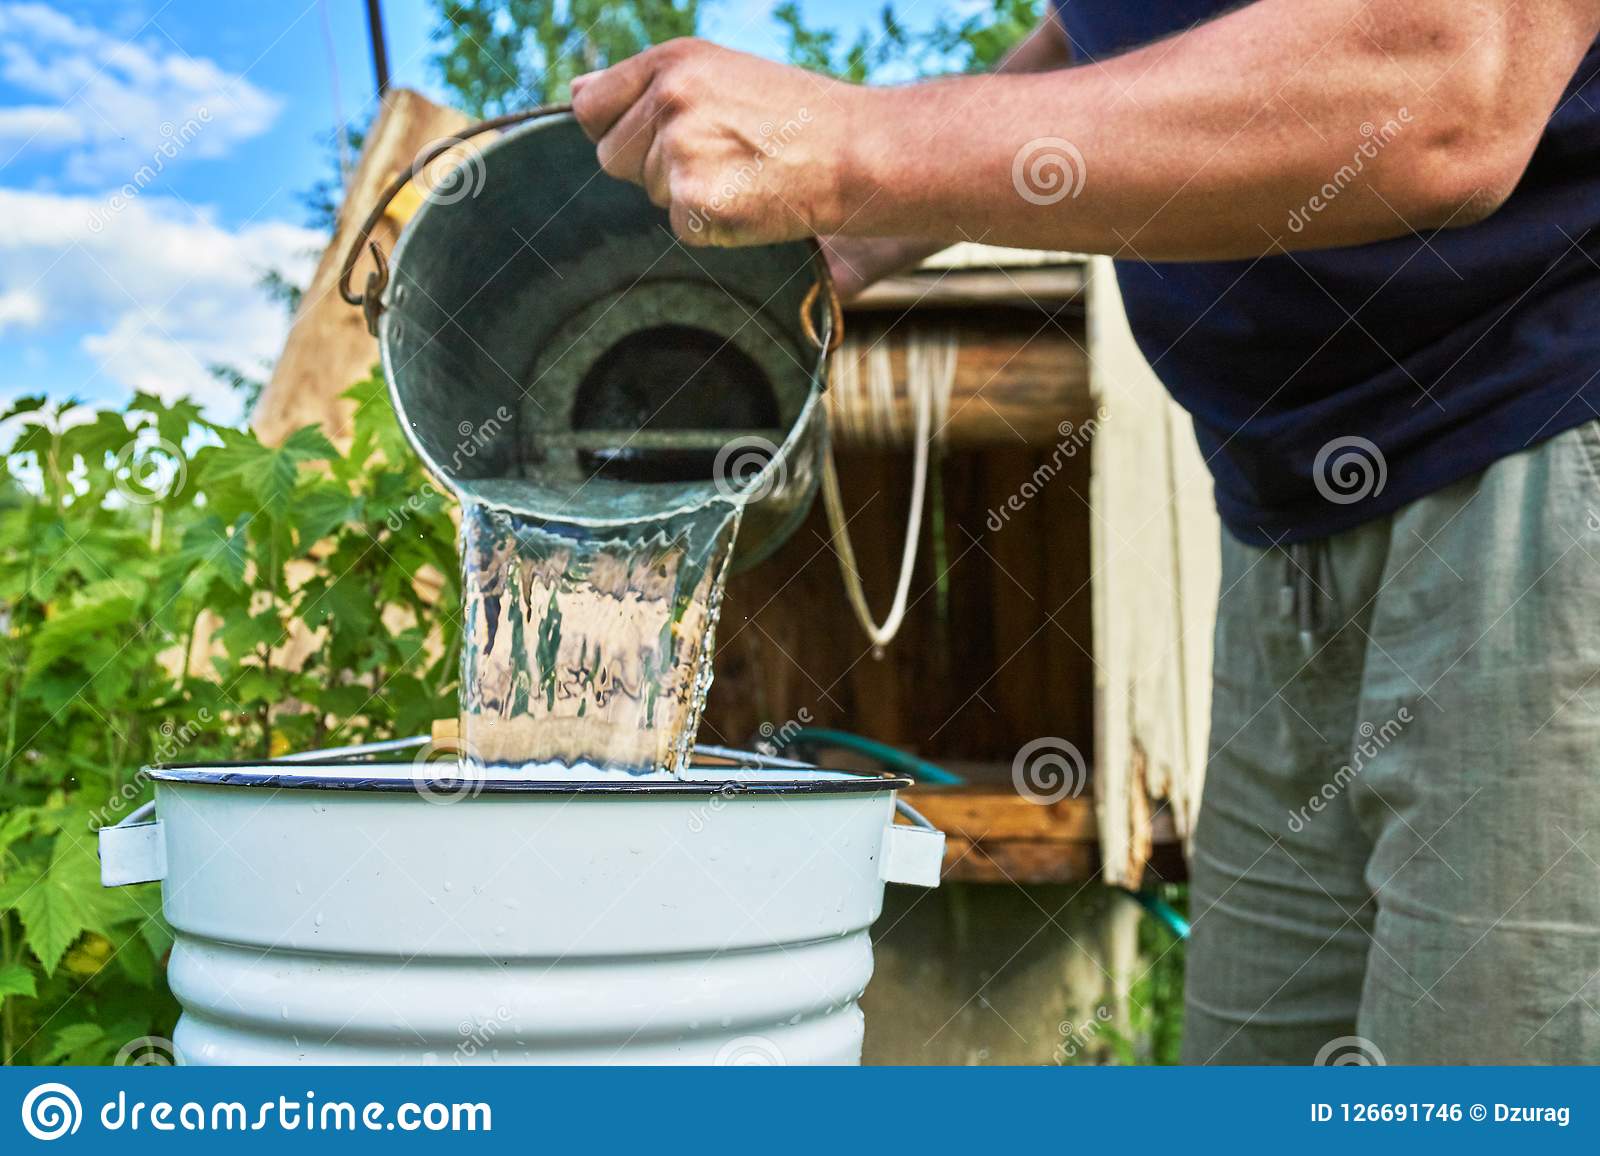 man-pouring-water-just-taken-up-well-enameled-bucket-man-pouring-water-just-taken-up-well-enameled-126691746.jpg